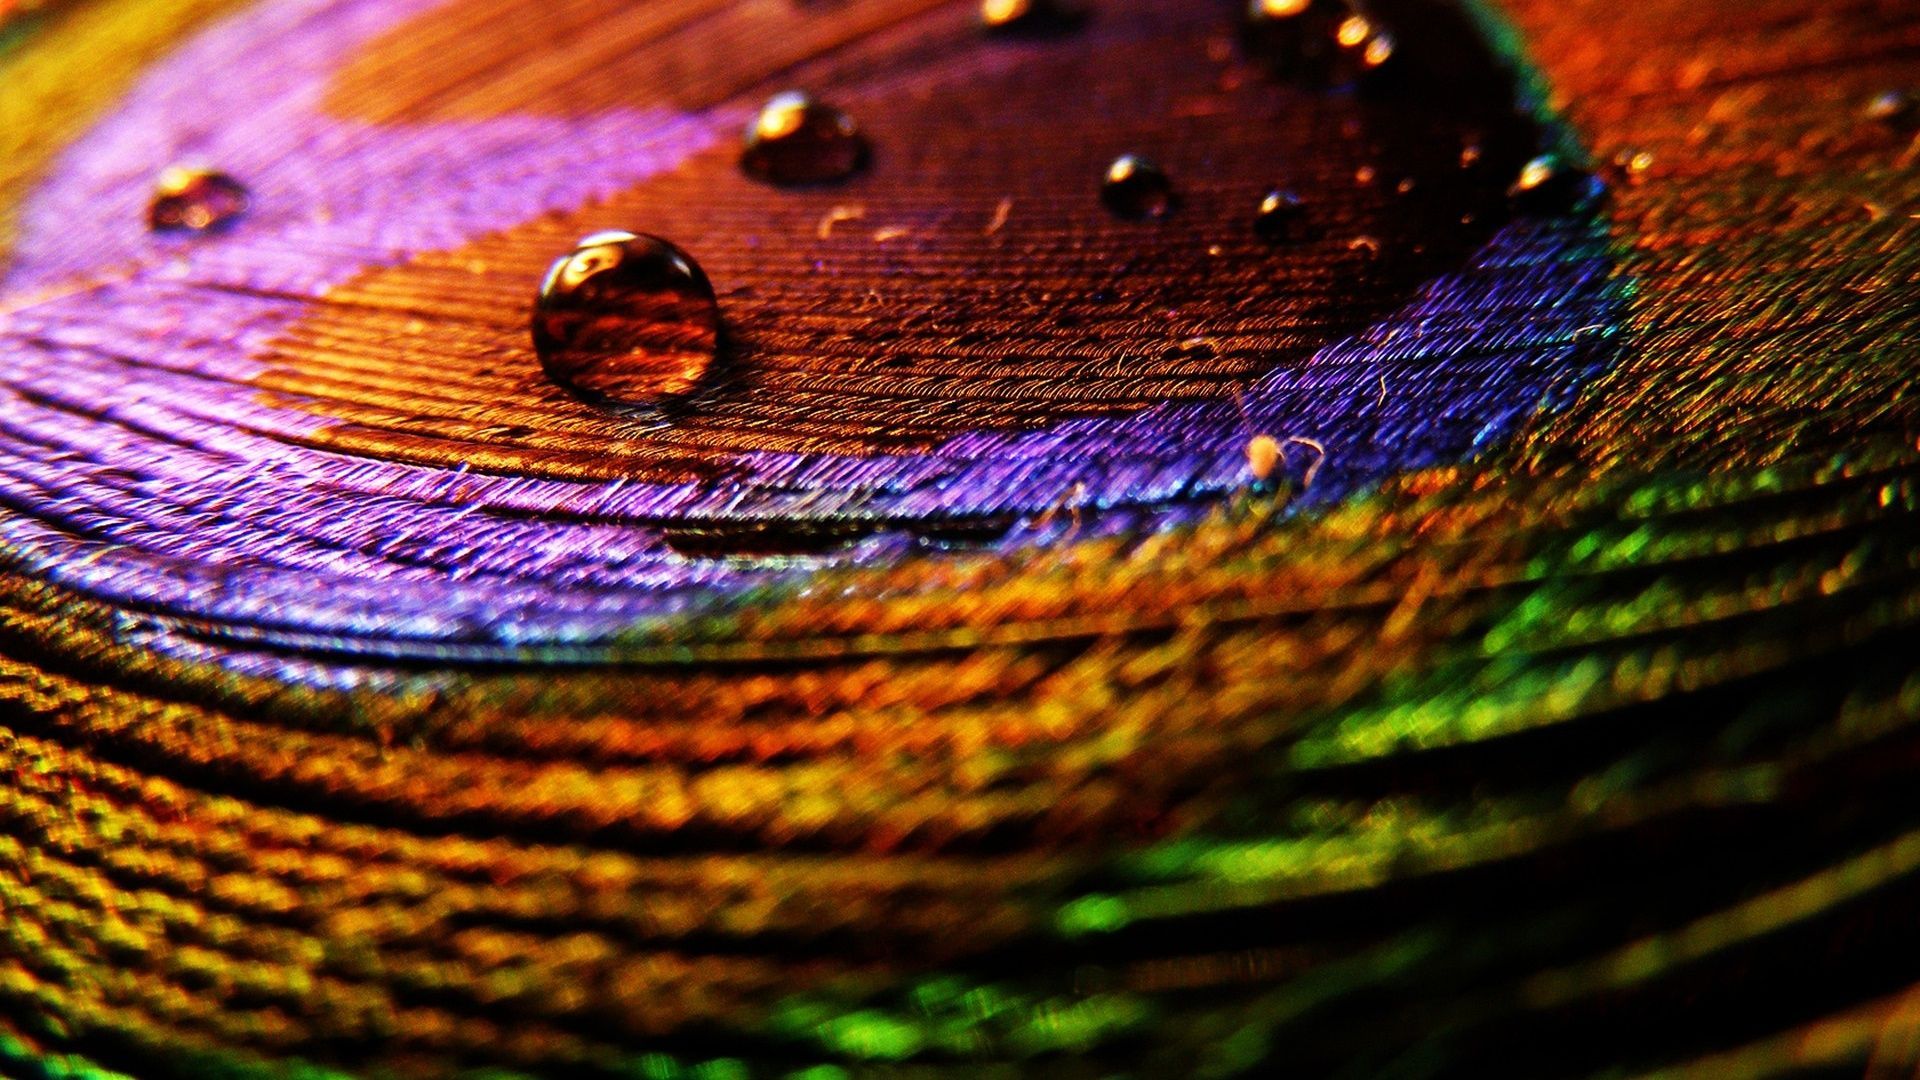 1920x1080 Peacock Feather Wallpaper For Desktop 48 Handpicked Wallpapers Collection